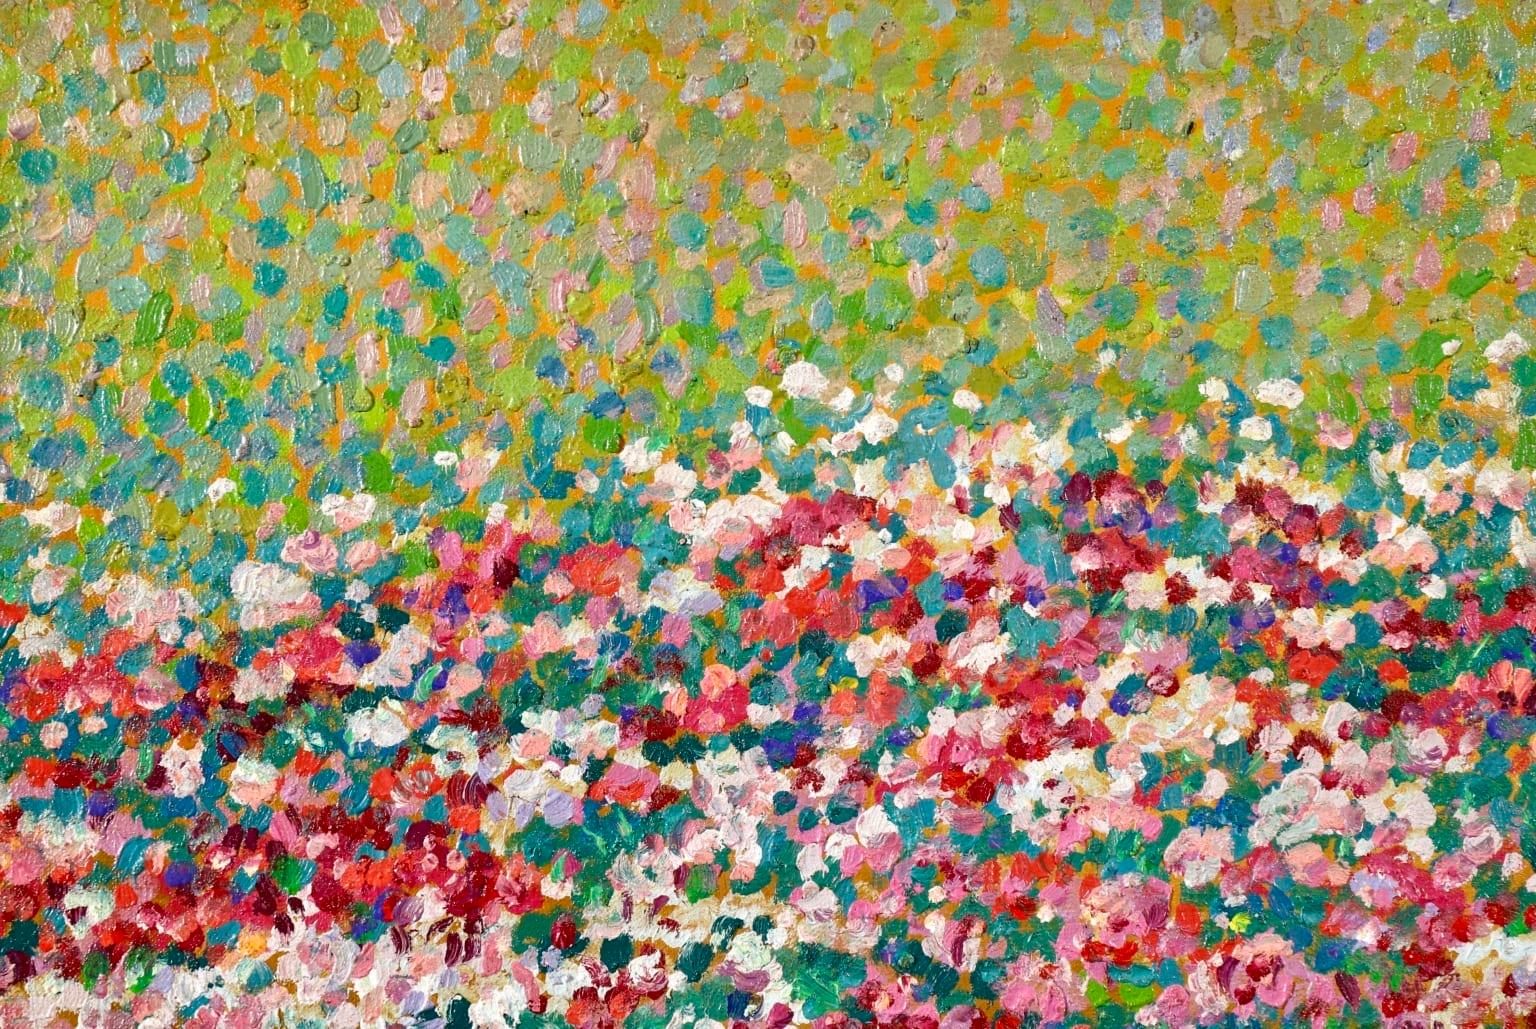 Field of Flowers - Post Impressionist Oil, Landscape Oil by J Martin-Ferrieres 1